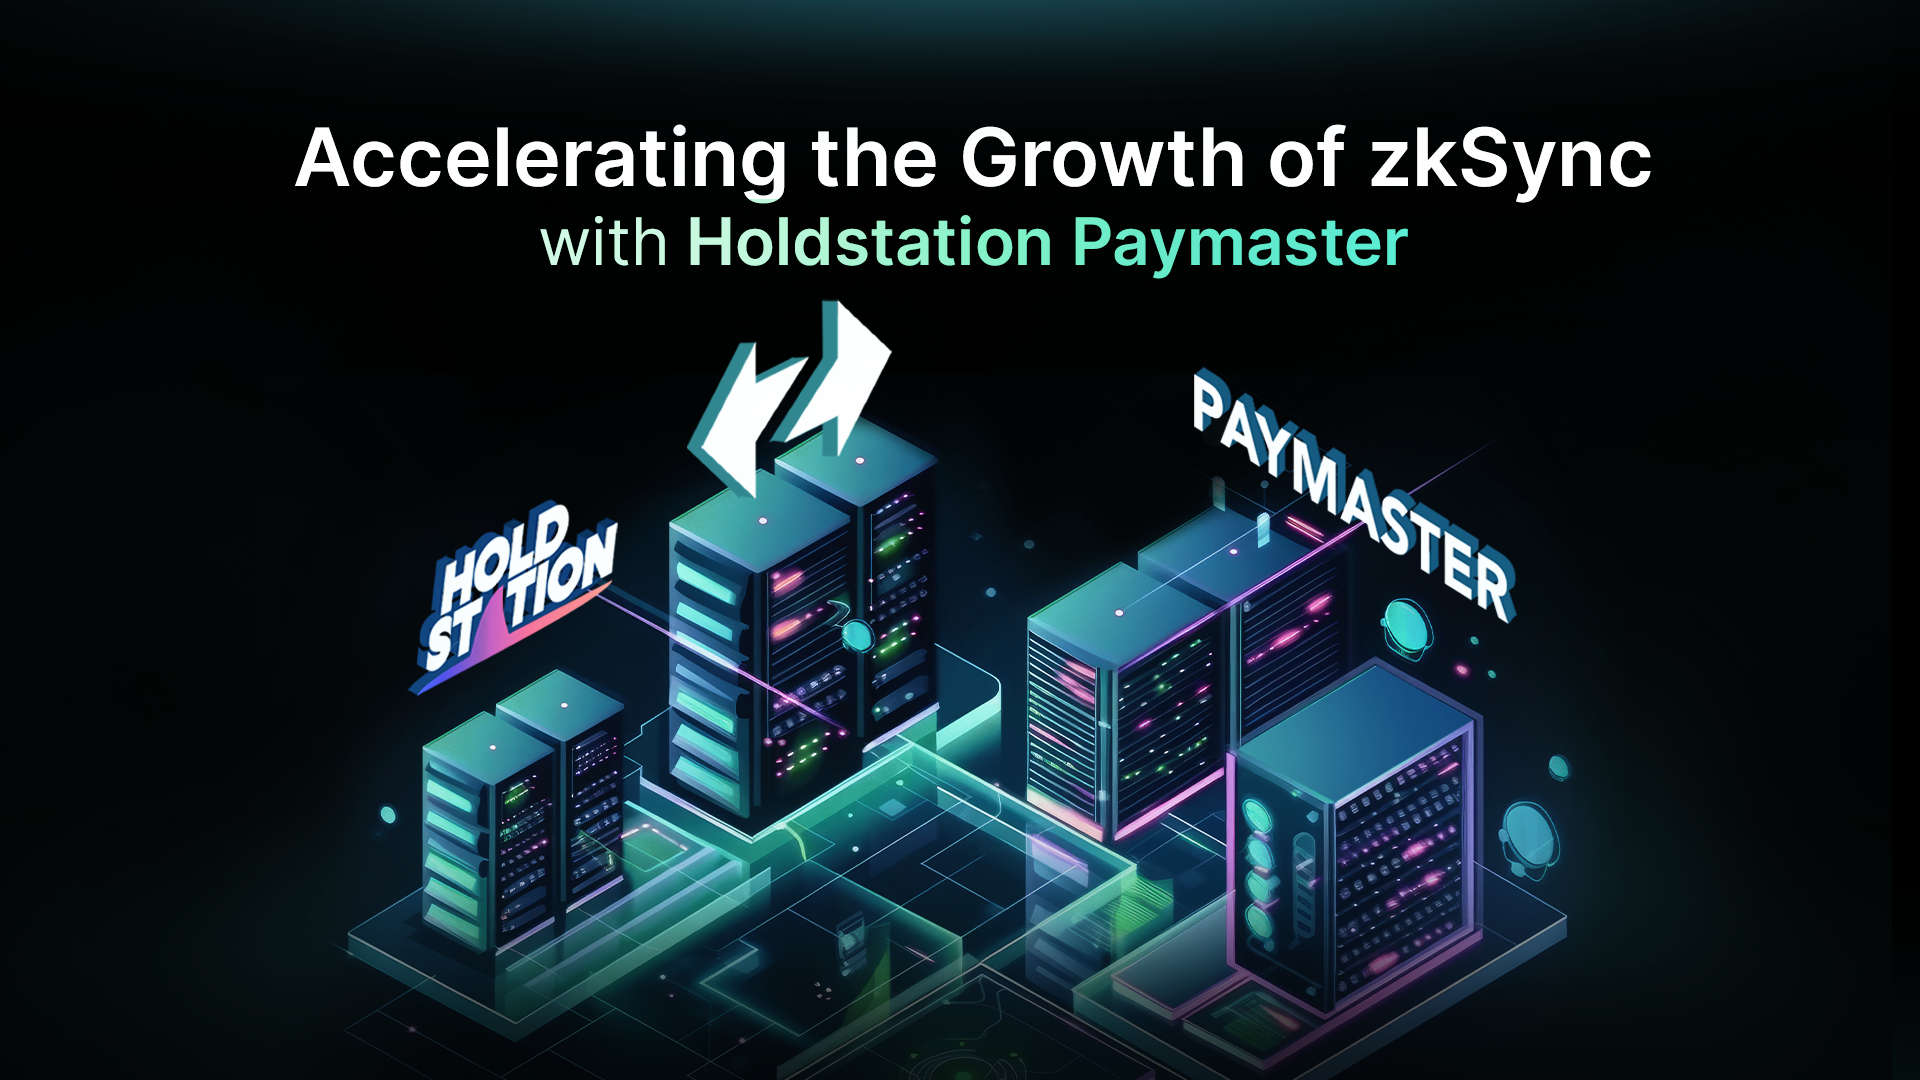 Accelerating the Growth of zkSync with Holdstation Paymaster